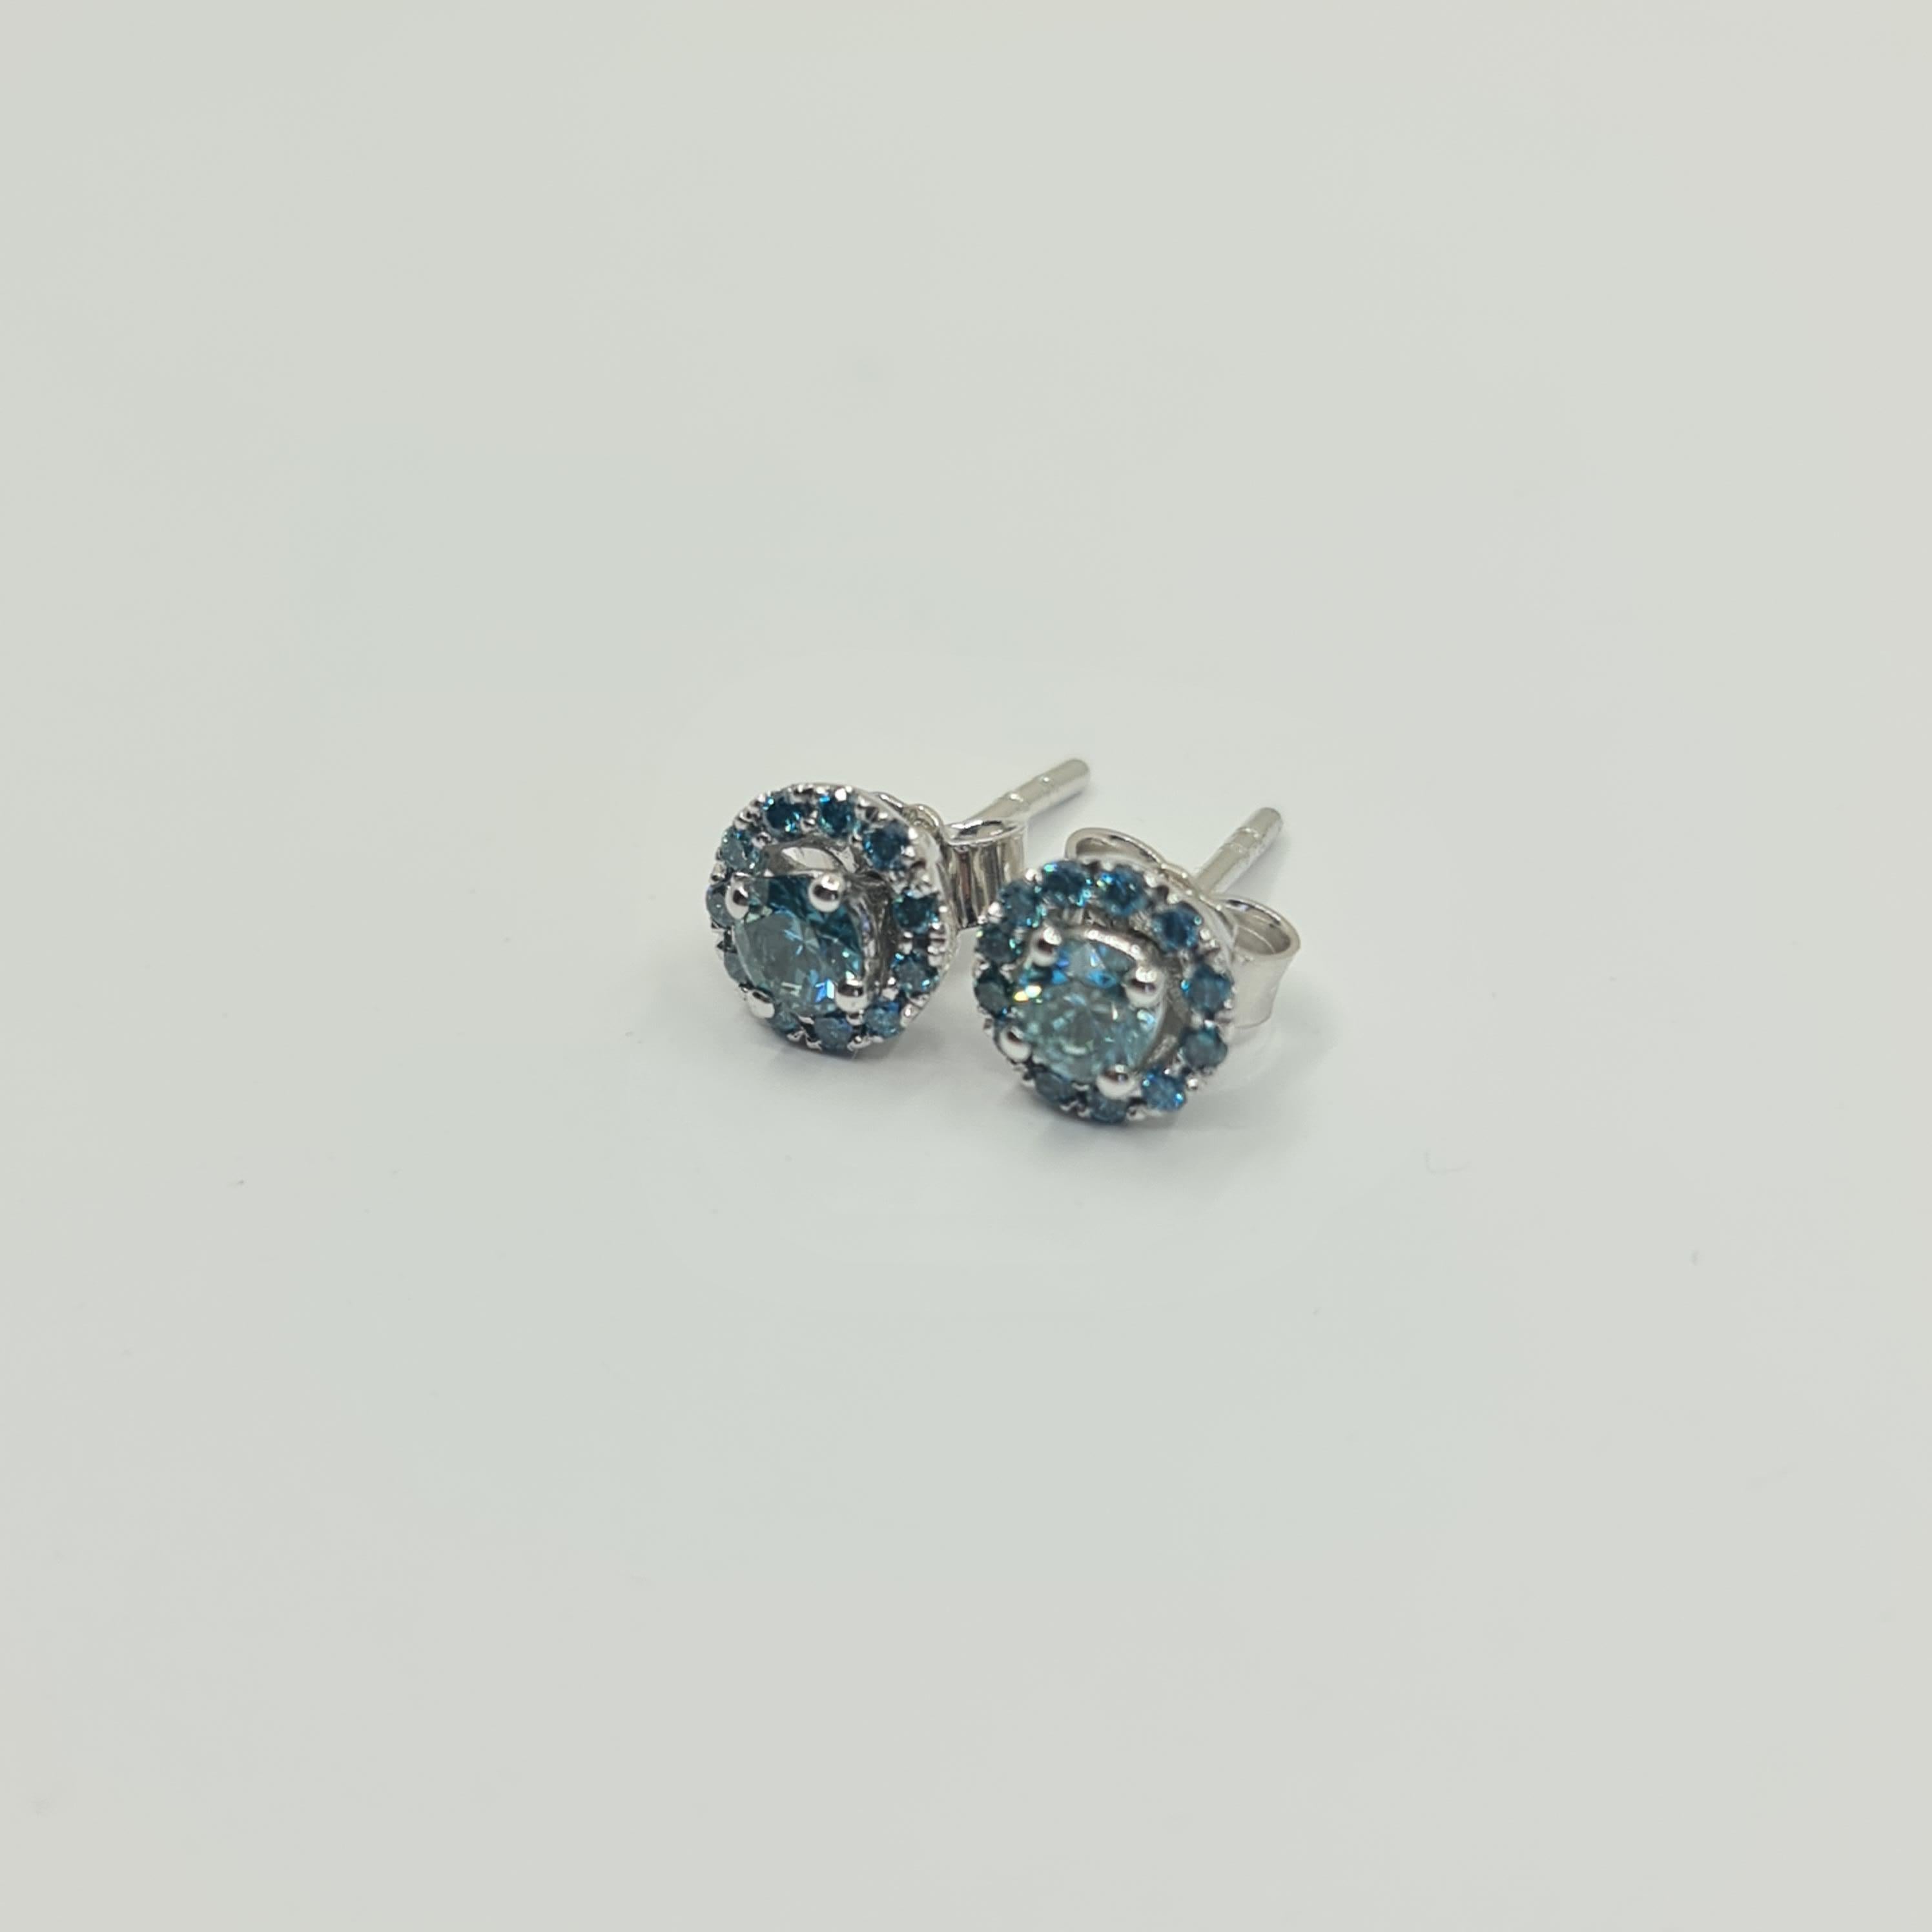 Exquisite GIA Certified Solitaire Diamond Studs 0.18/0.19 Carat Fancy Blue-Green For Sale 3